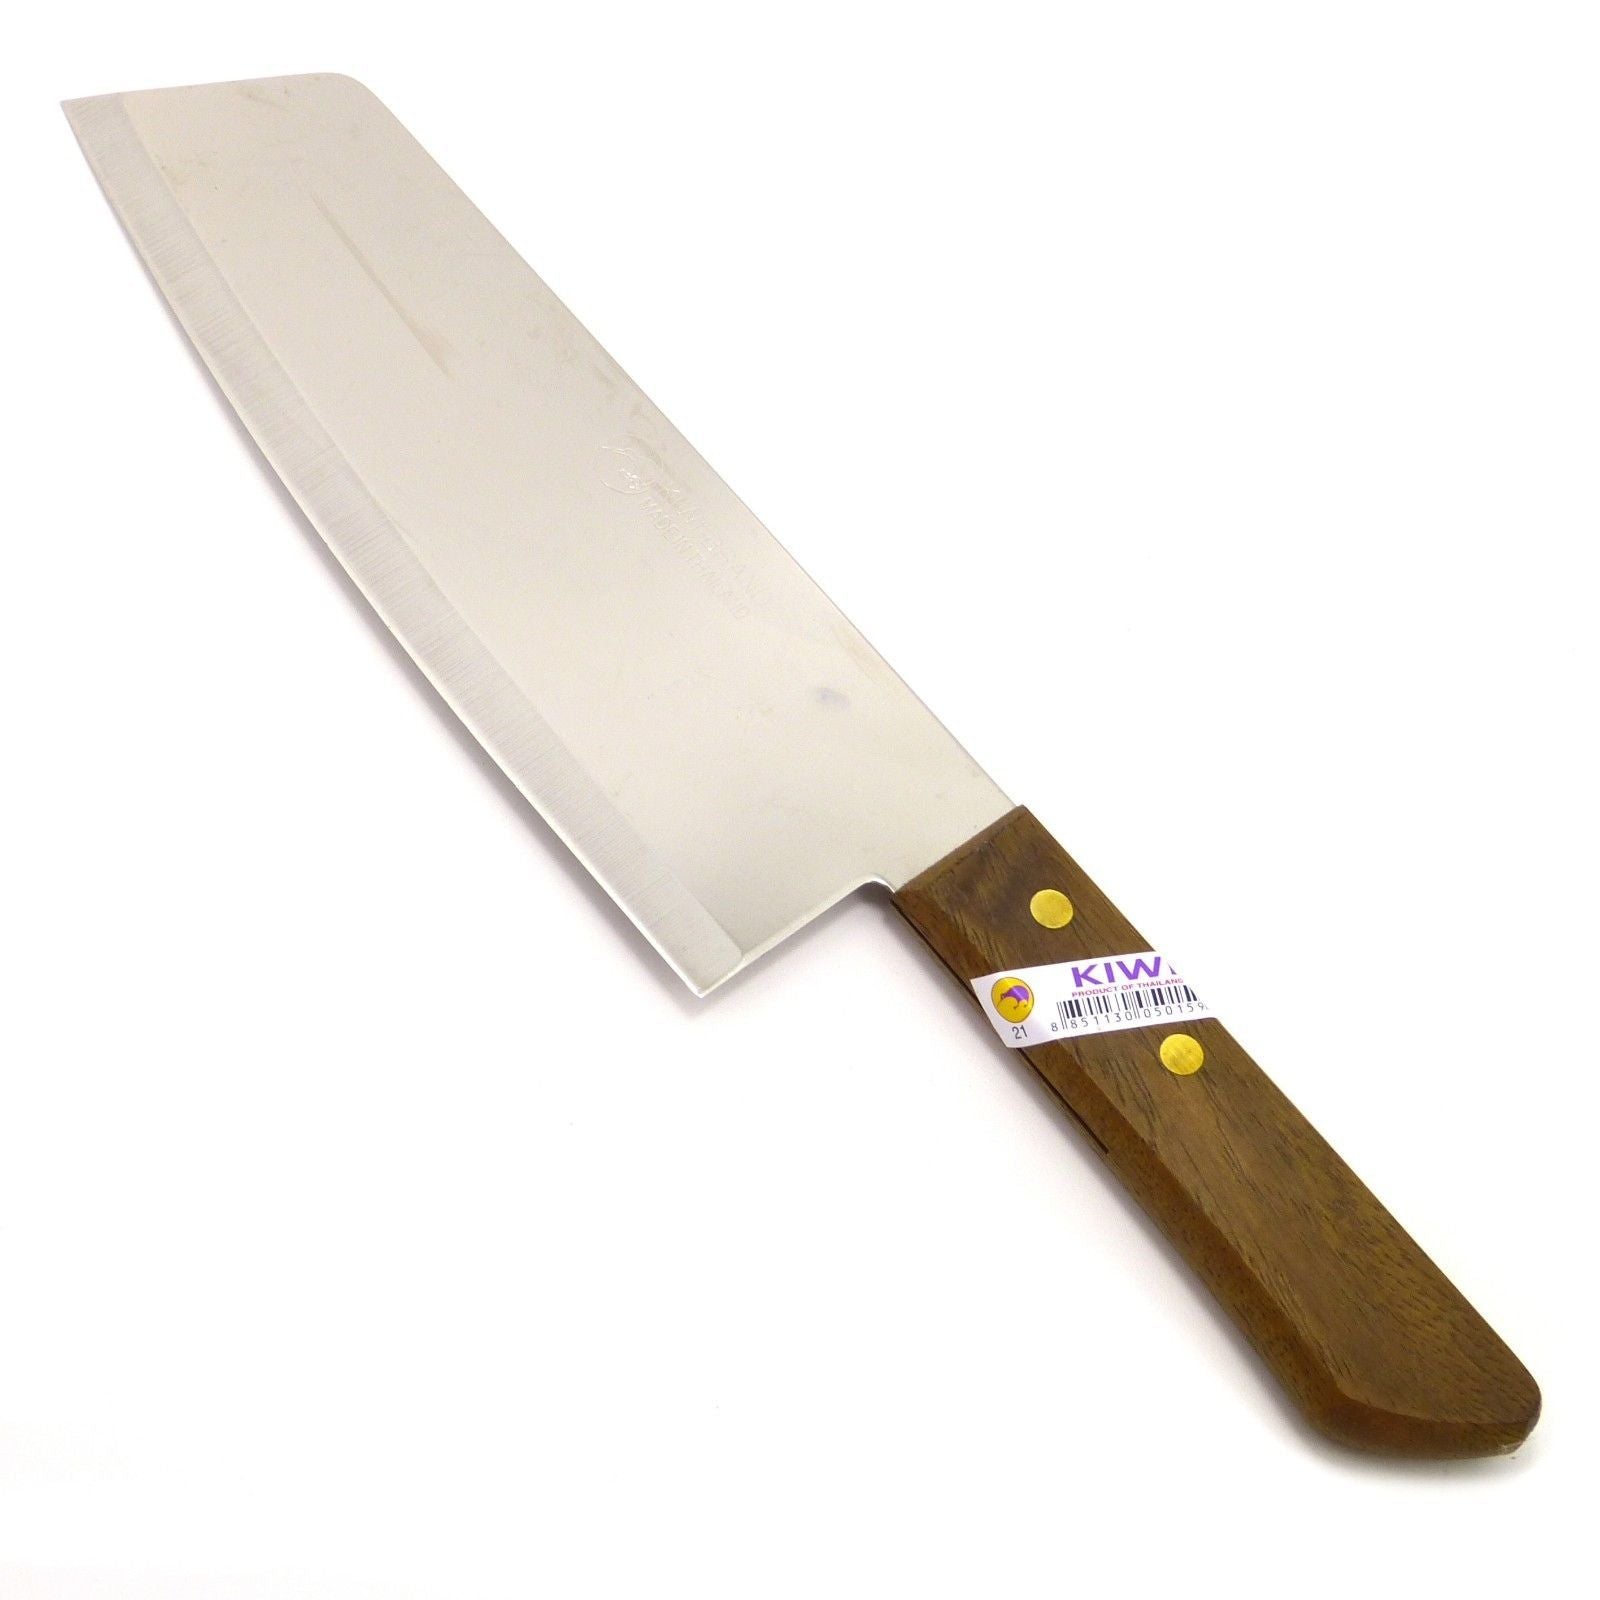 8.5'' chef knife stainless steel kiwi